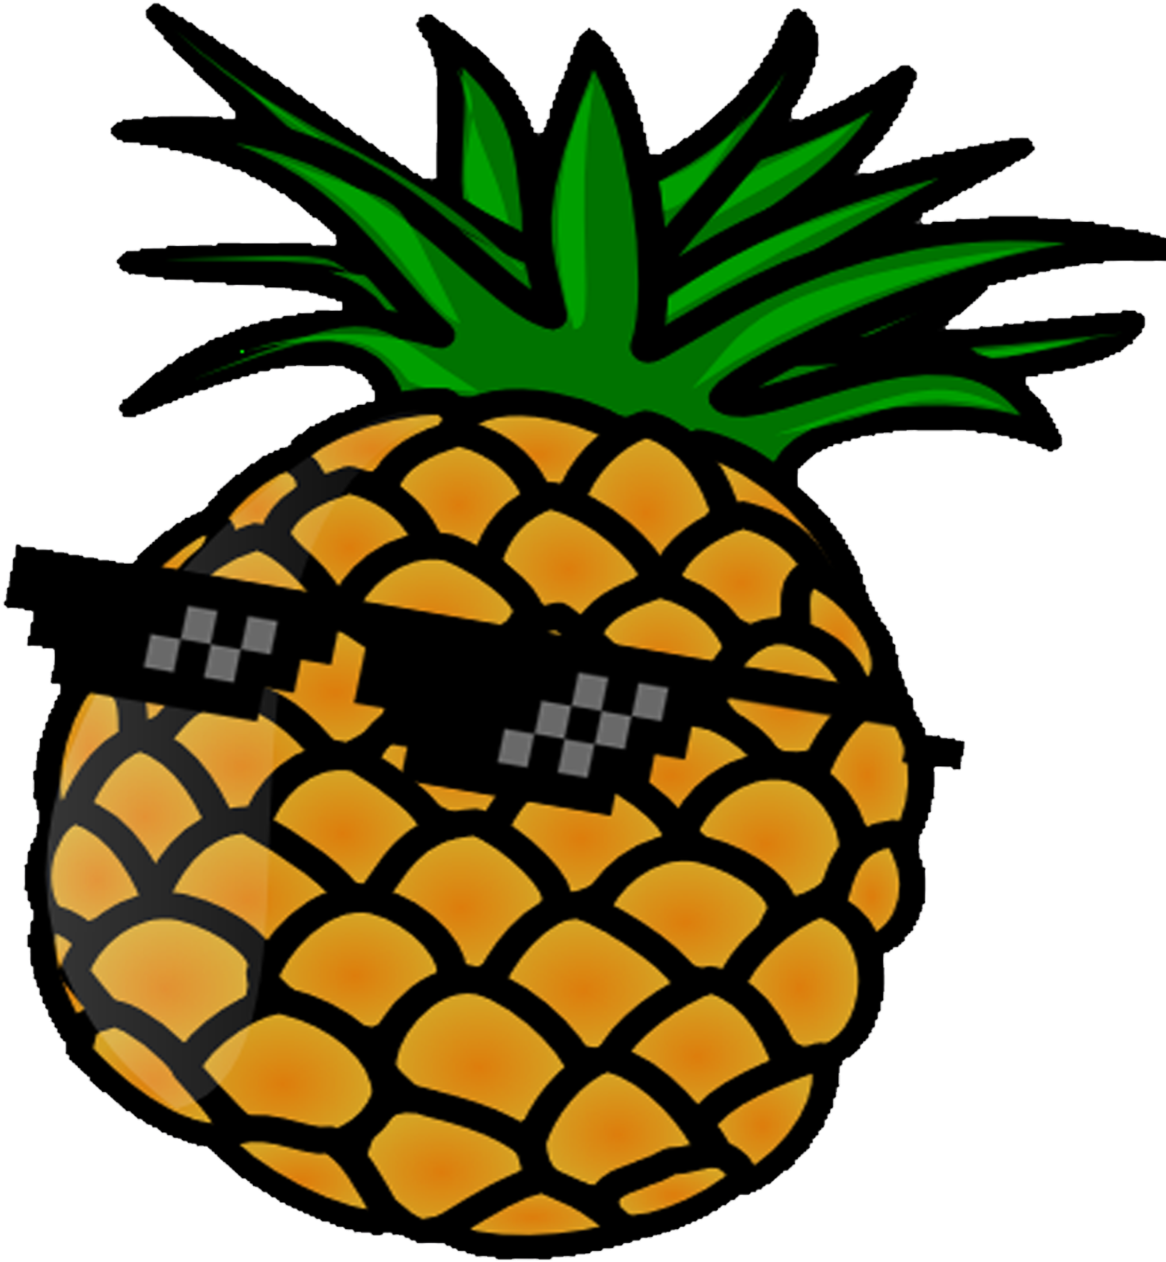 Pineapples Are Cool, Sunglasses Are Cool - Pineapple Clipart Jpg (1280x1707)